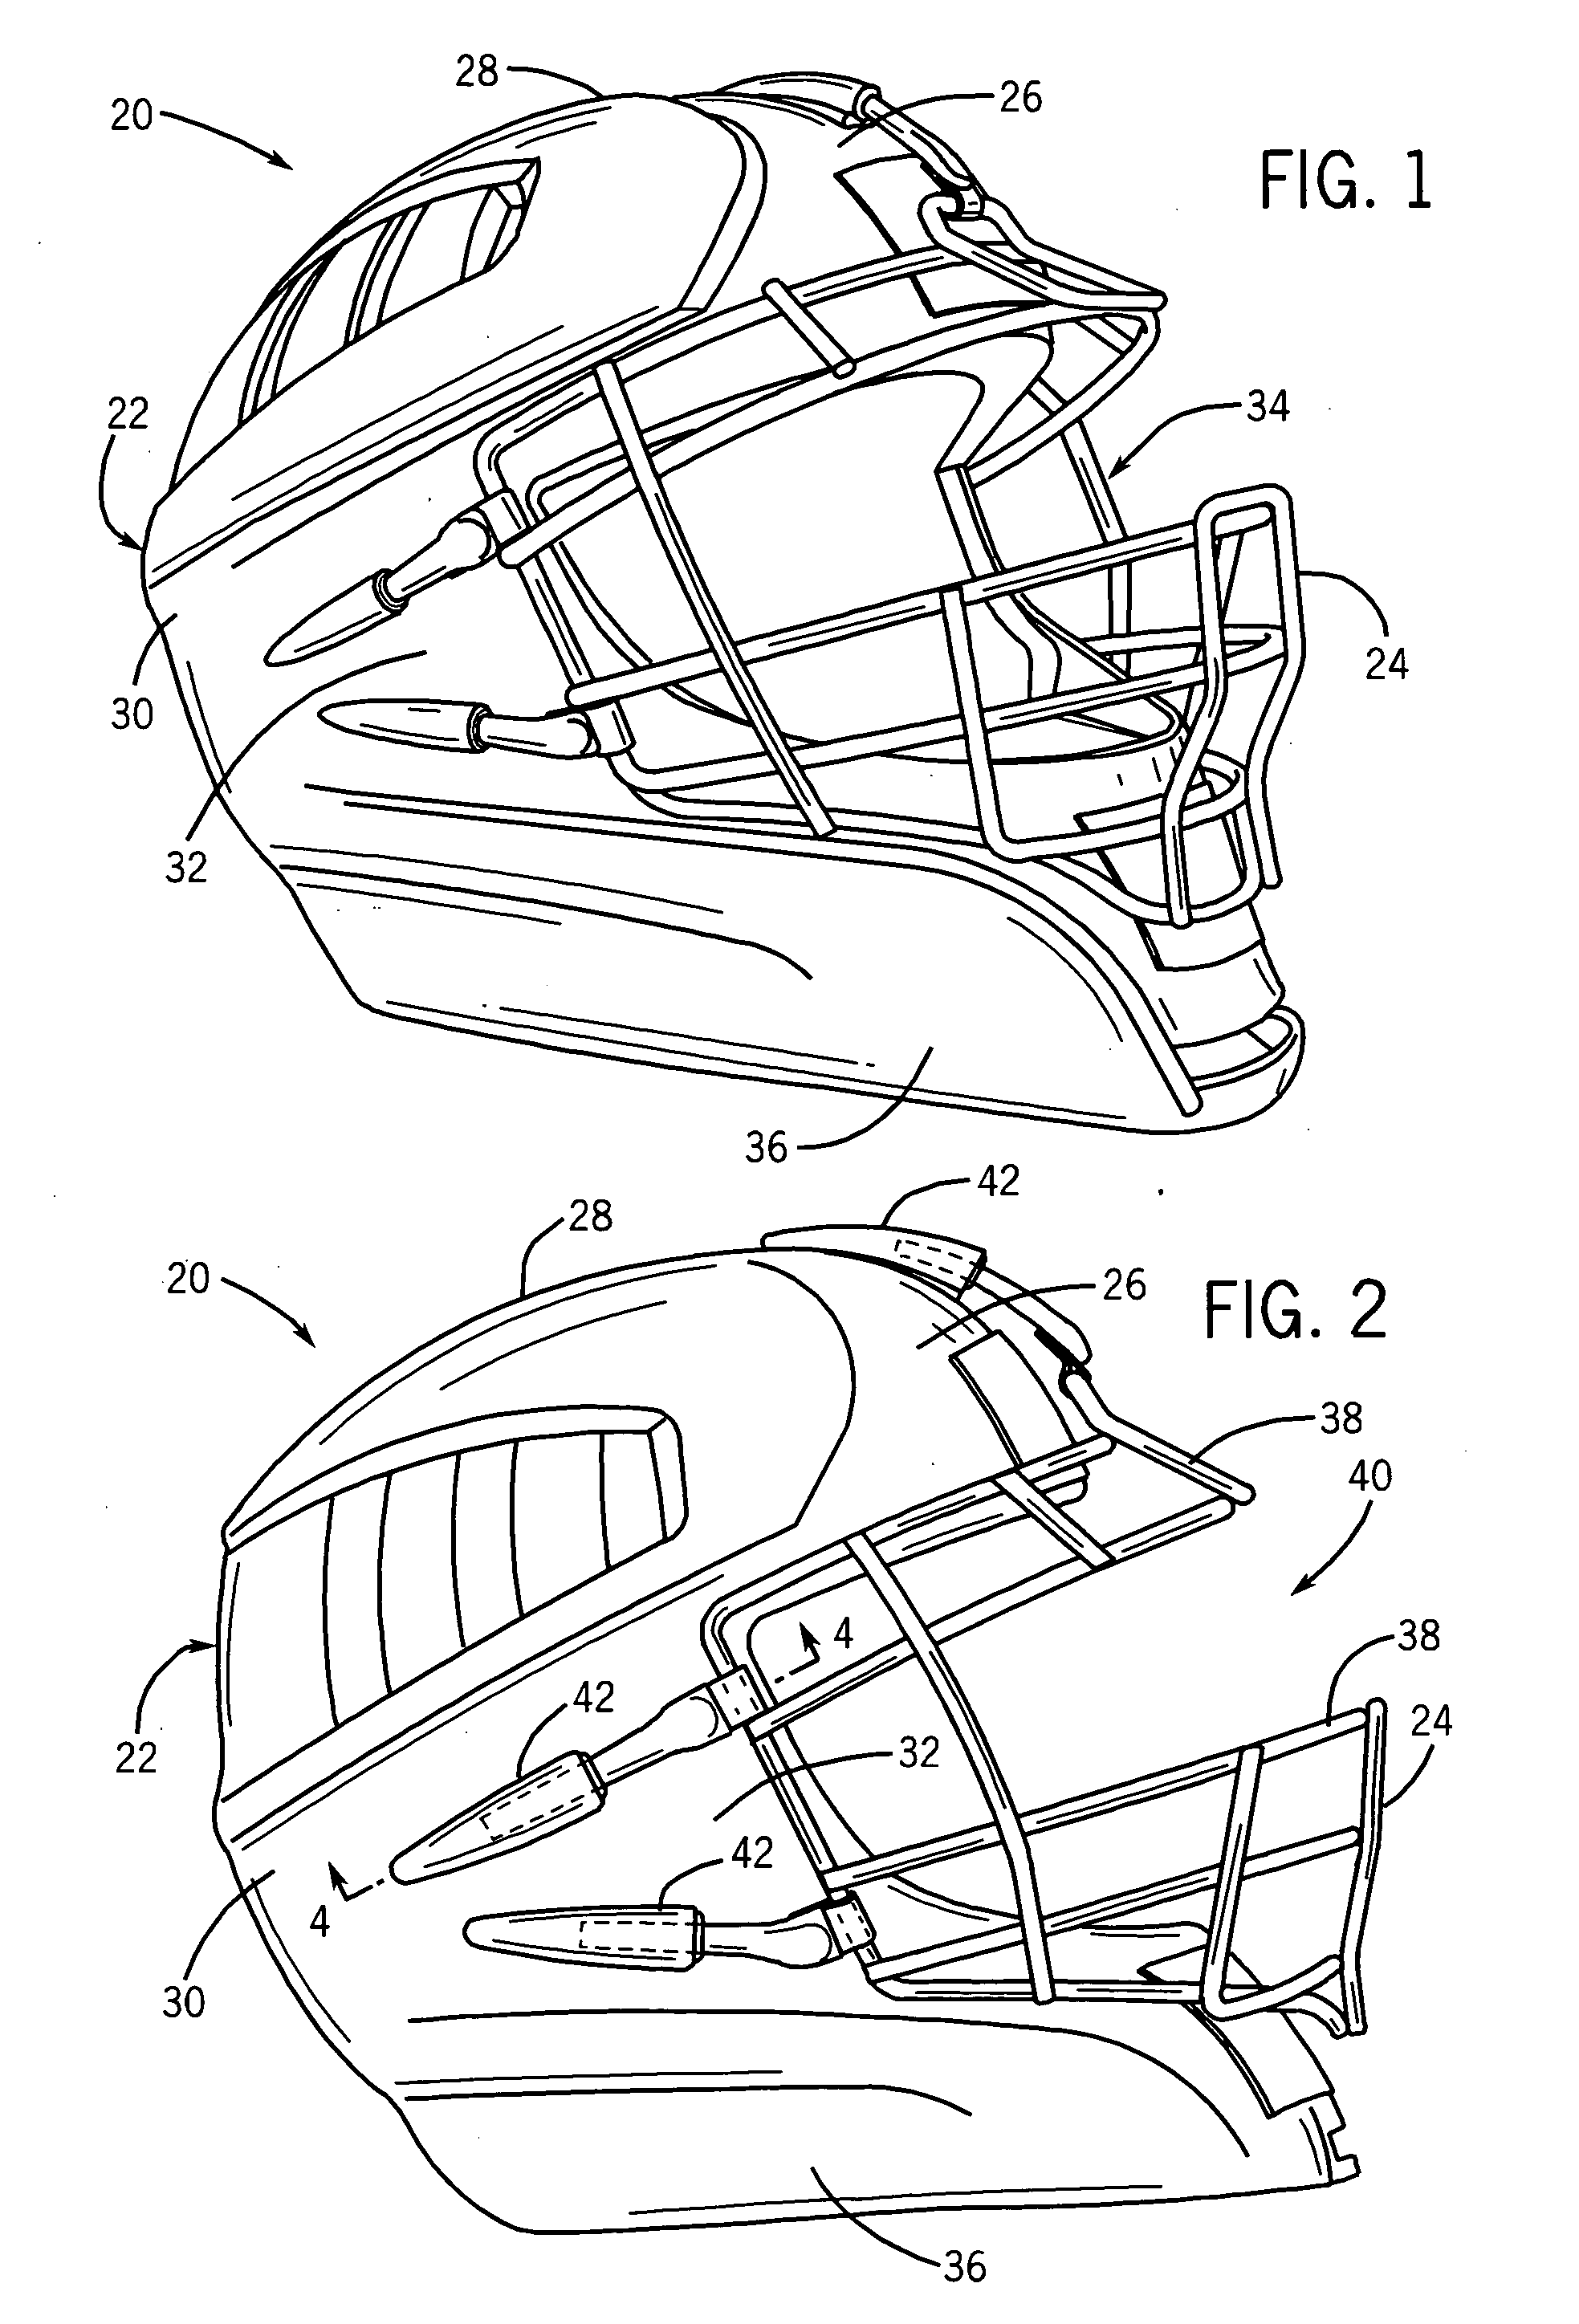 Shock-absorbing facemask attachment assembly